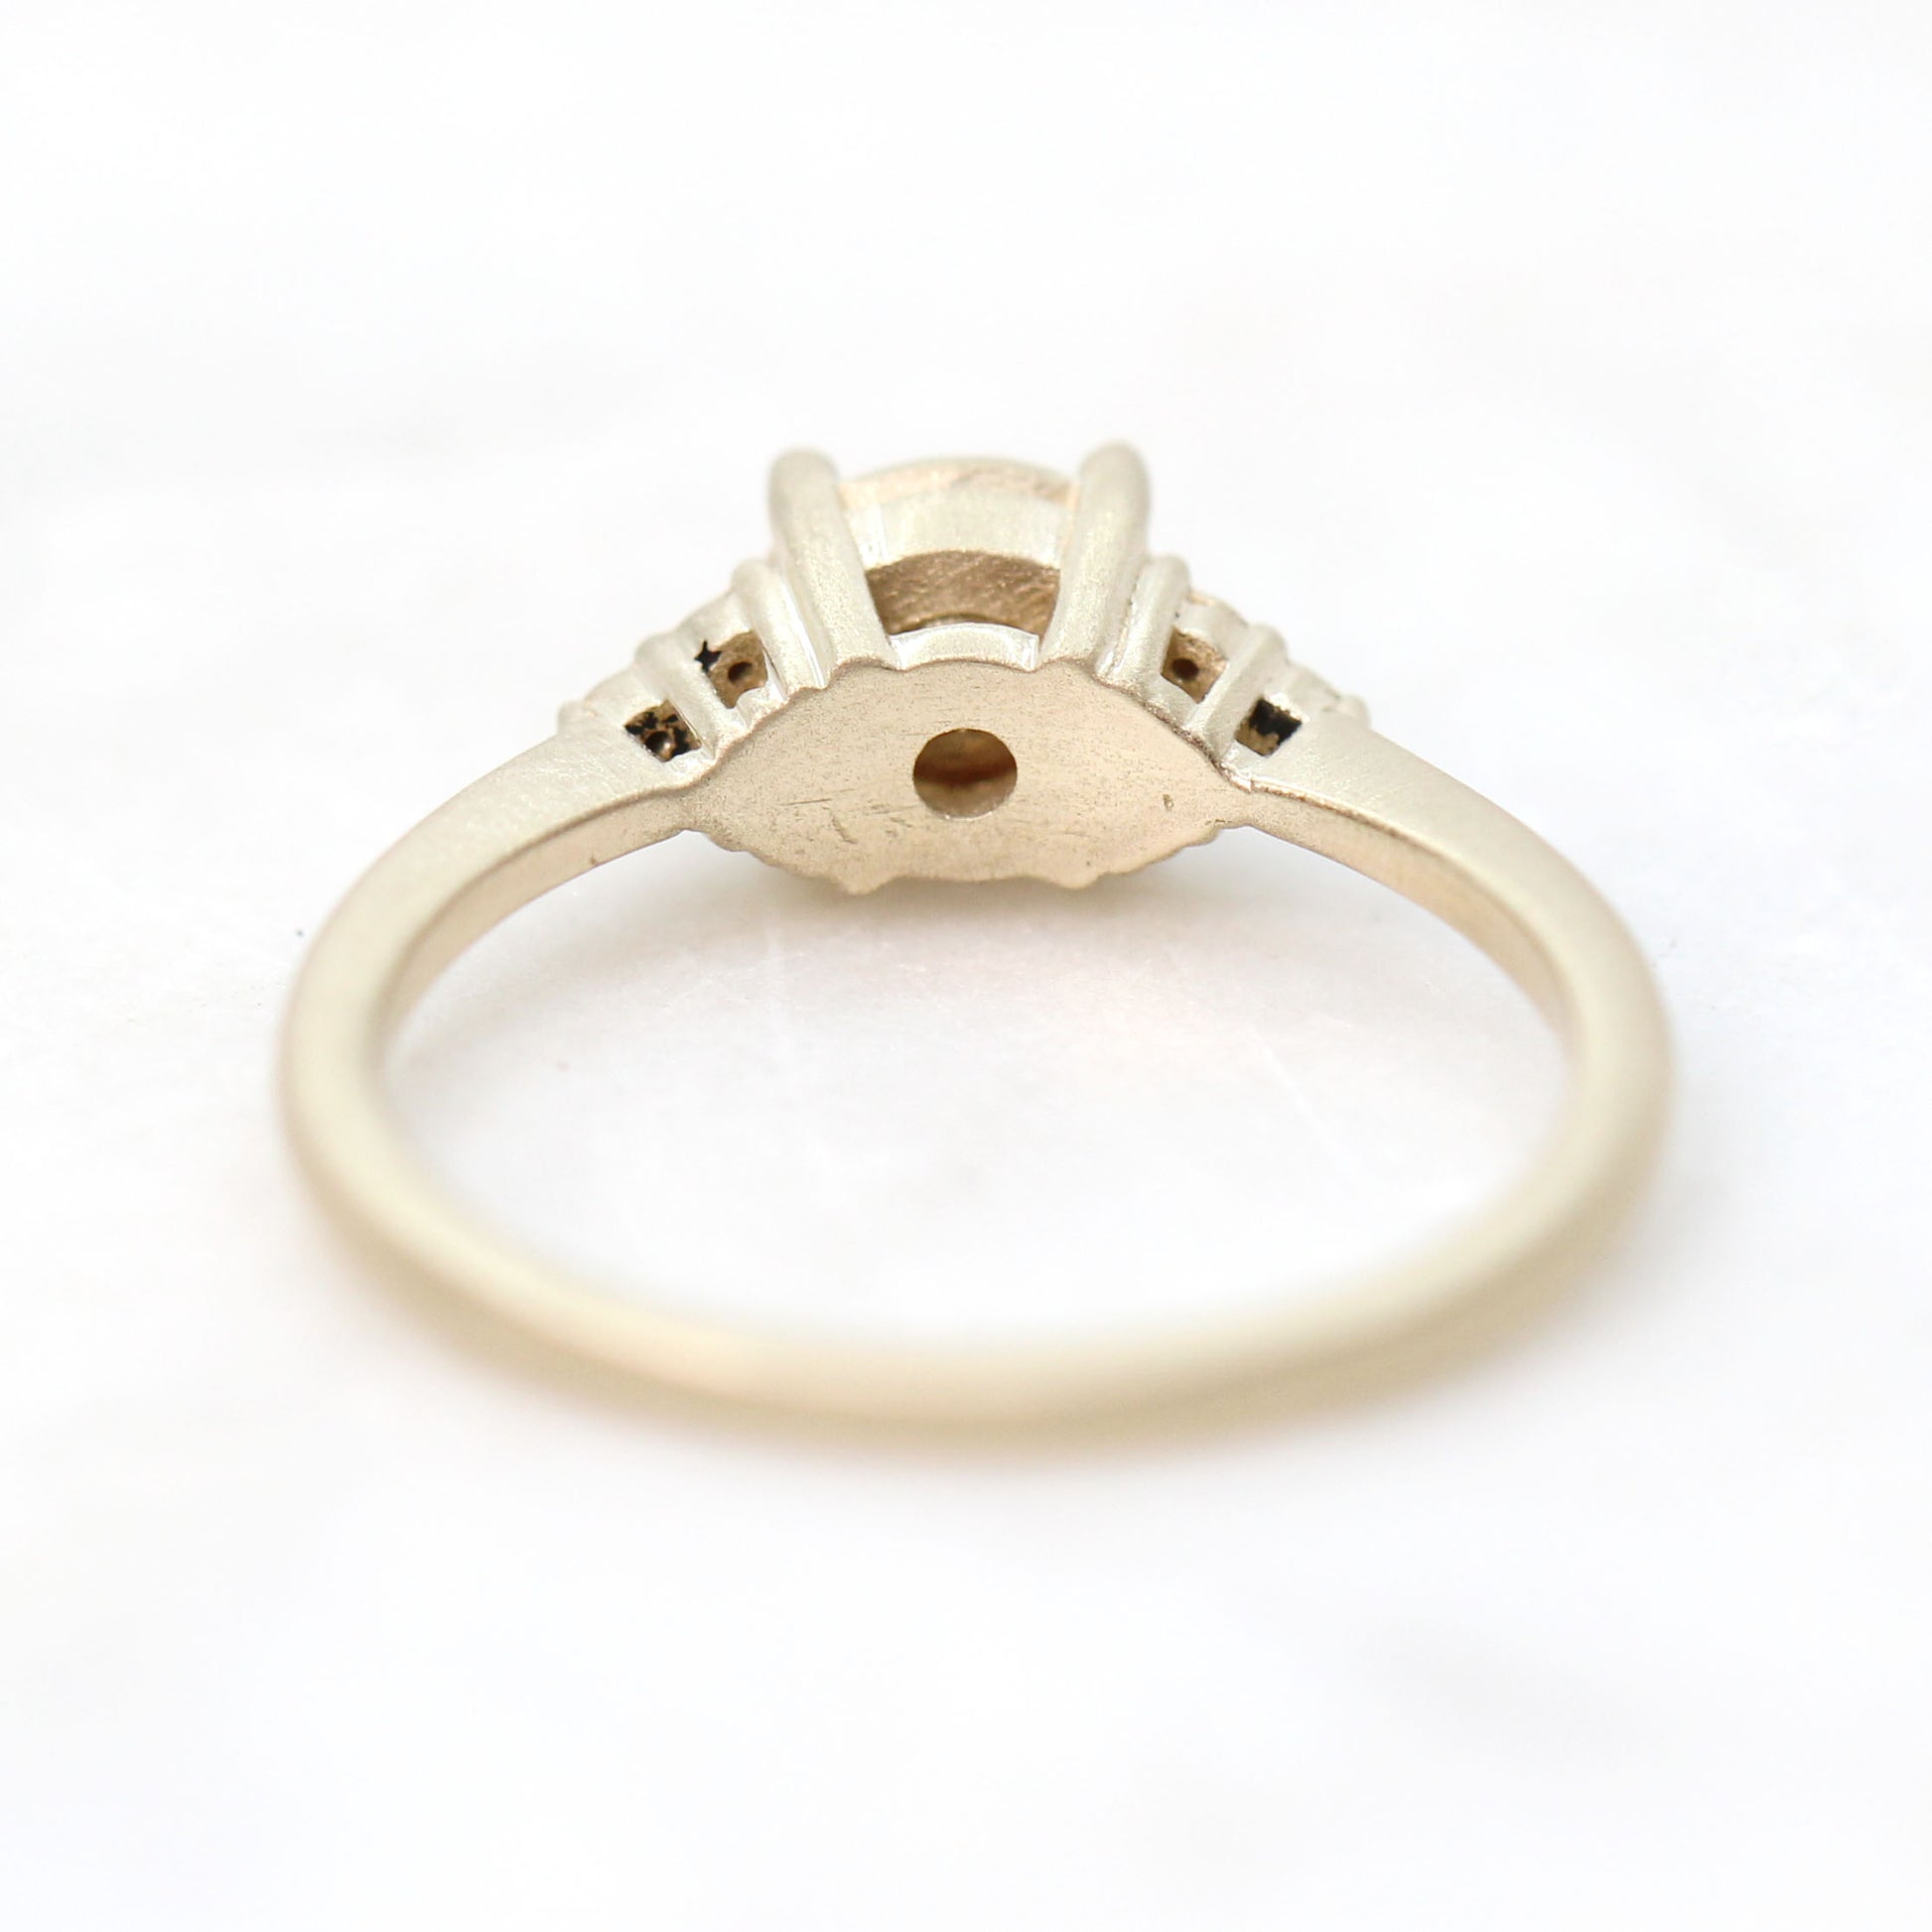 Solid Imogene Ring with 1 Carat Round Gold Stone in your choice of 14k gold - Midwinter Co. Alternative Bridal Rings and Modern Fine Jewelry